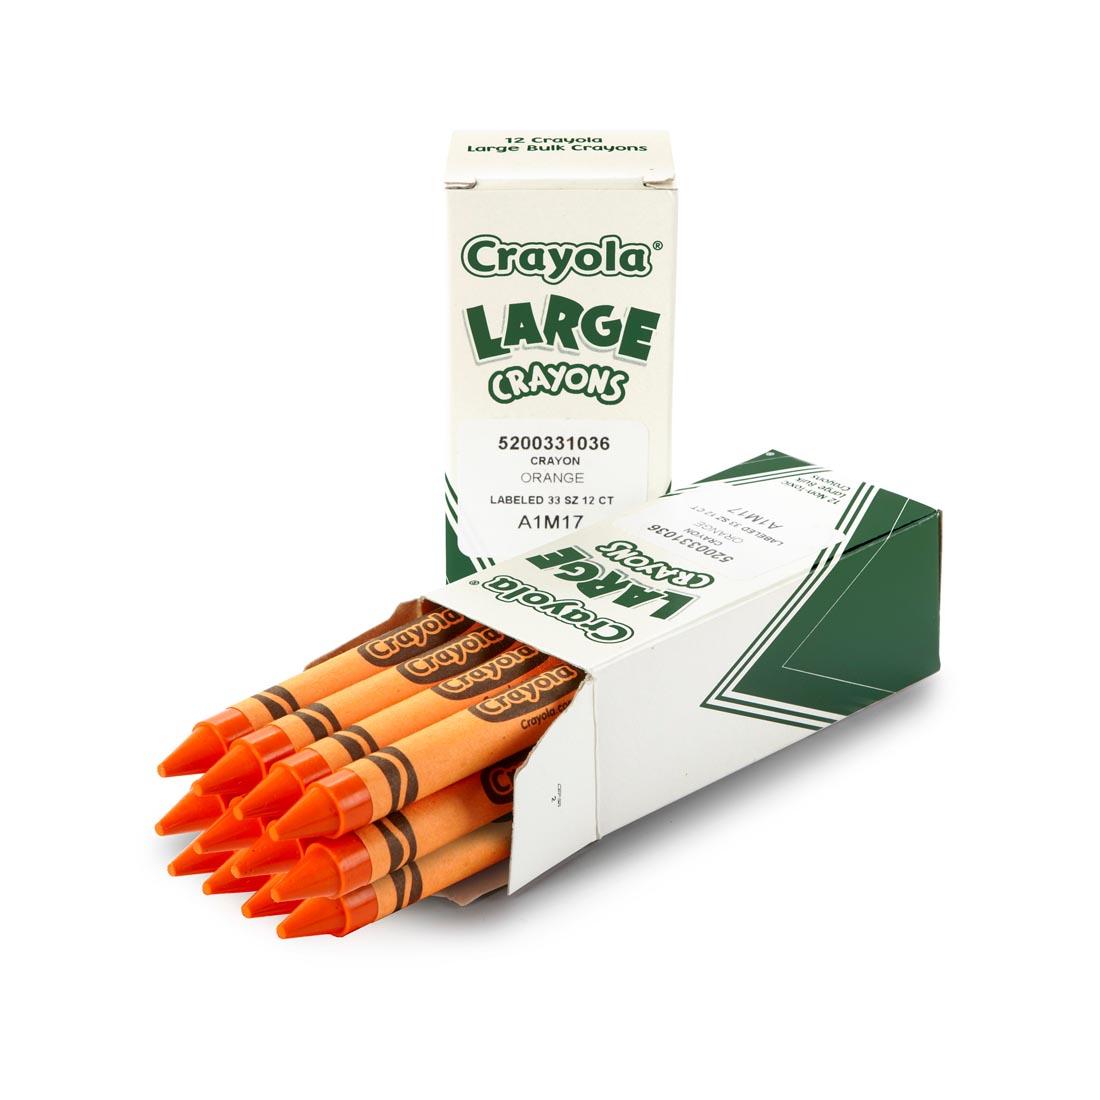 Crayola Large Crayon Refill boxes shown both closed and with orange crayons inside